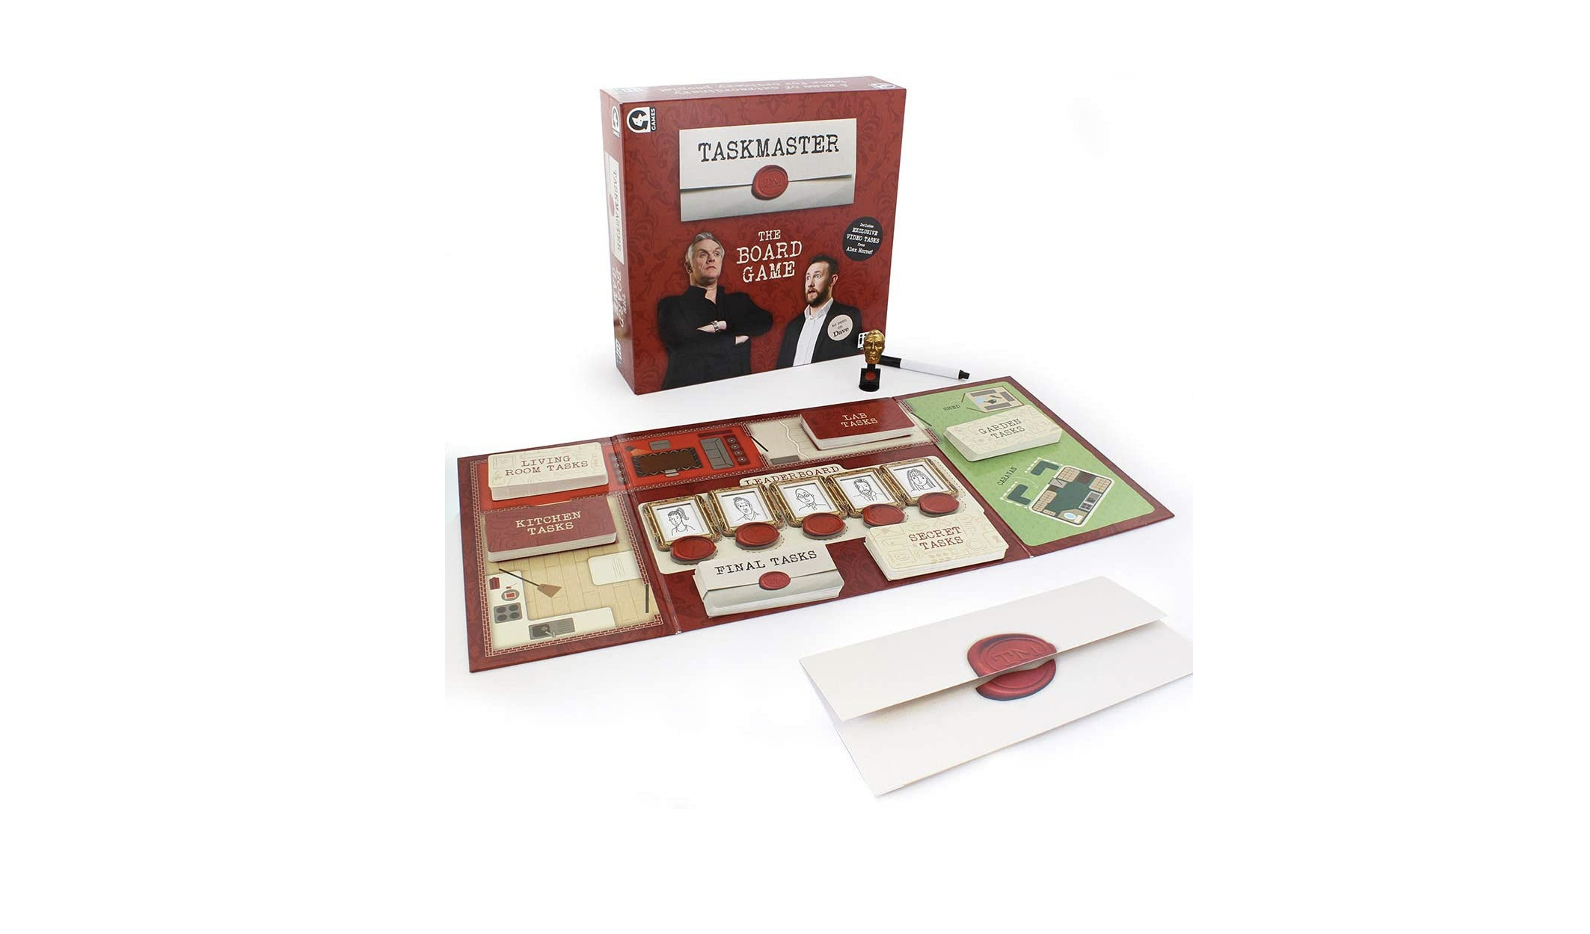 Taskmaster - The Board Game for the family, Smyths Toys